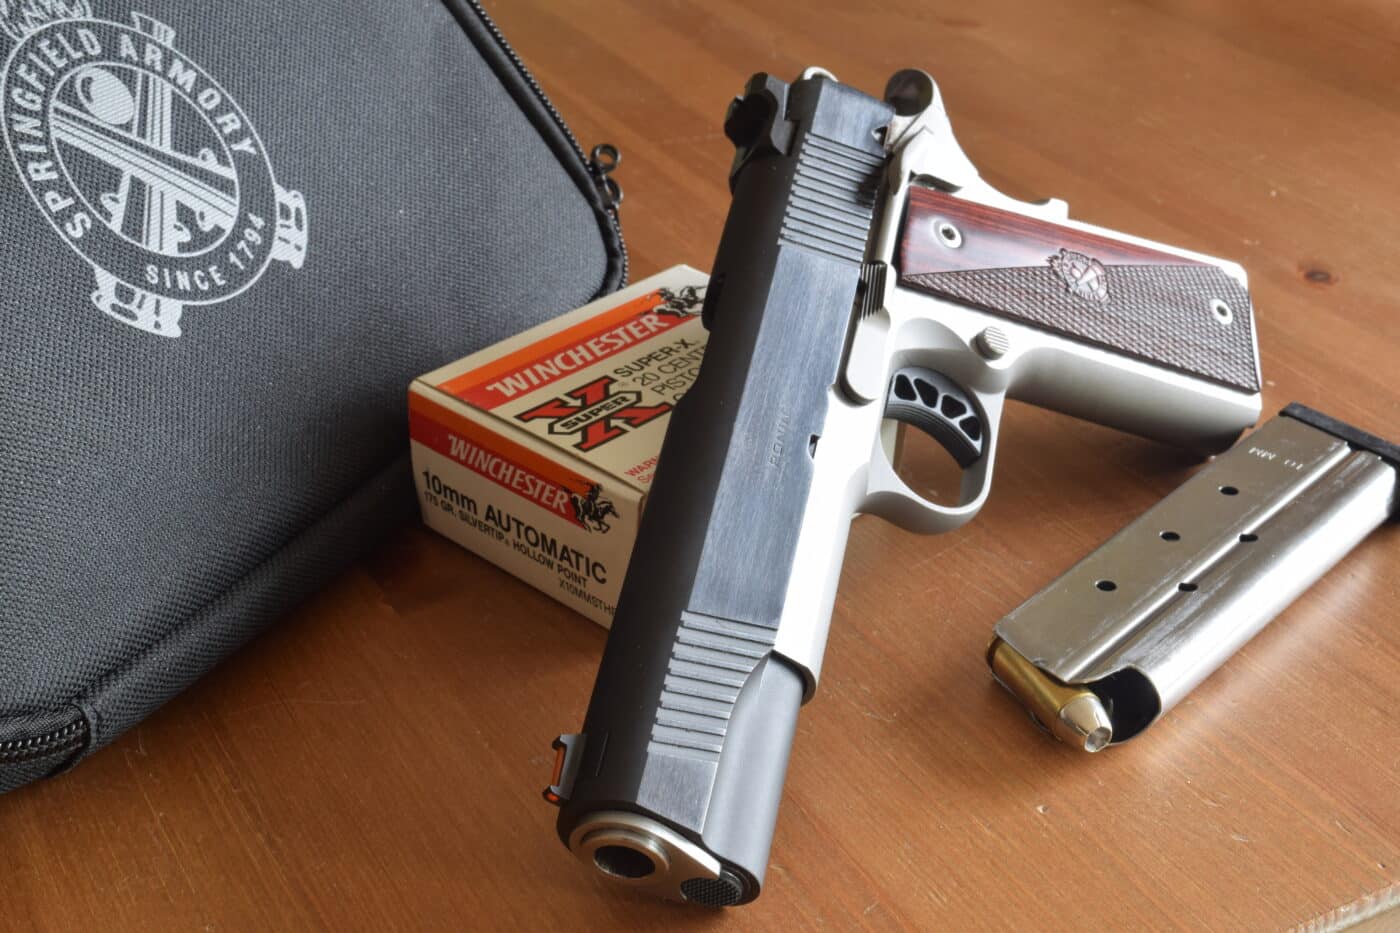 springfield 1911 10mm for bear protection